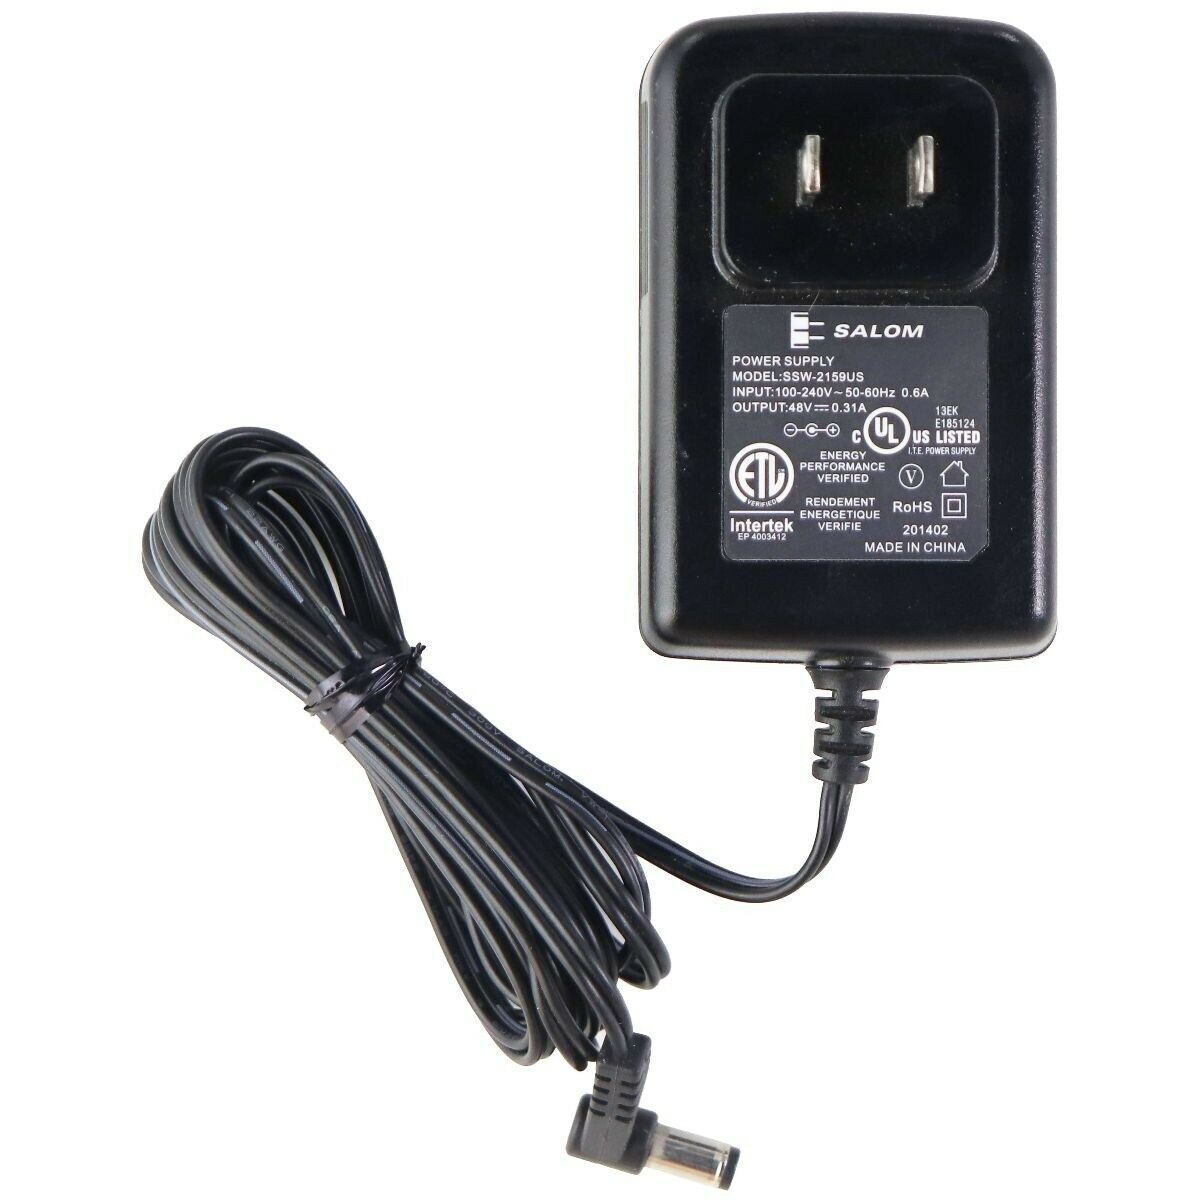 Salom (48V/0.31A) Power Supply Wall Charger / Adapter - Black (SSW-2159US) Brand: Salom MPN: SSW-2159US UPC: 625771